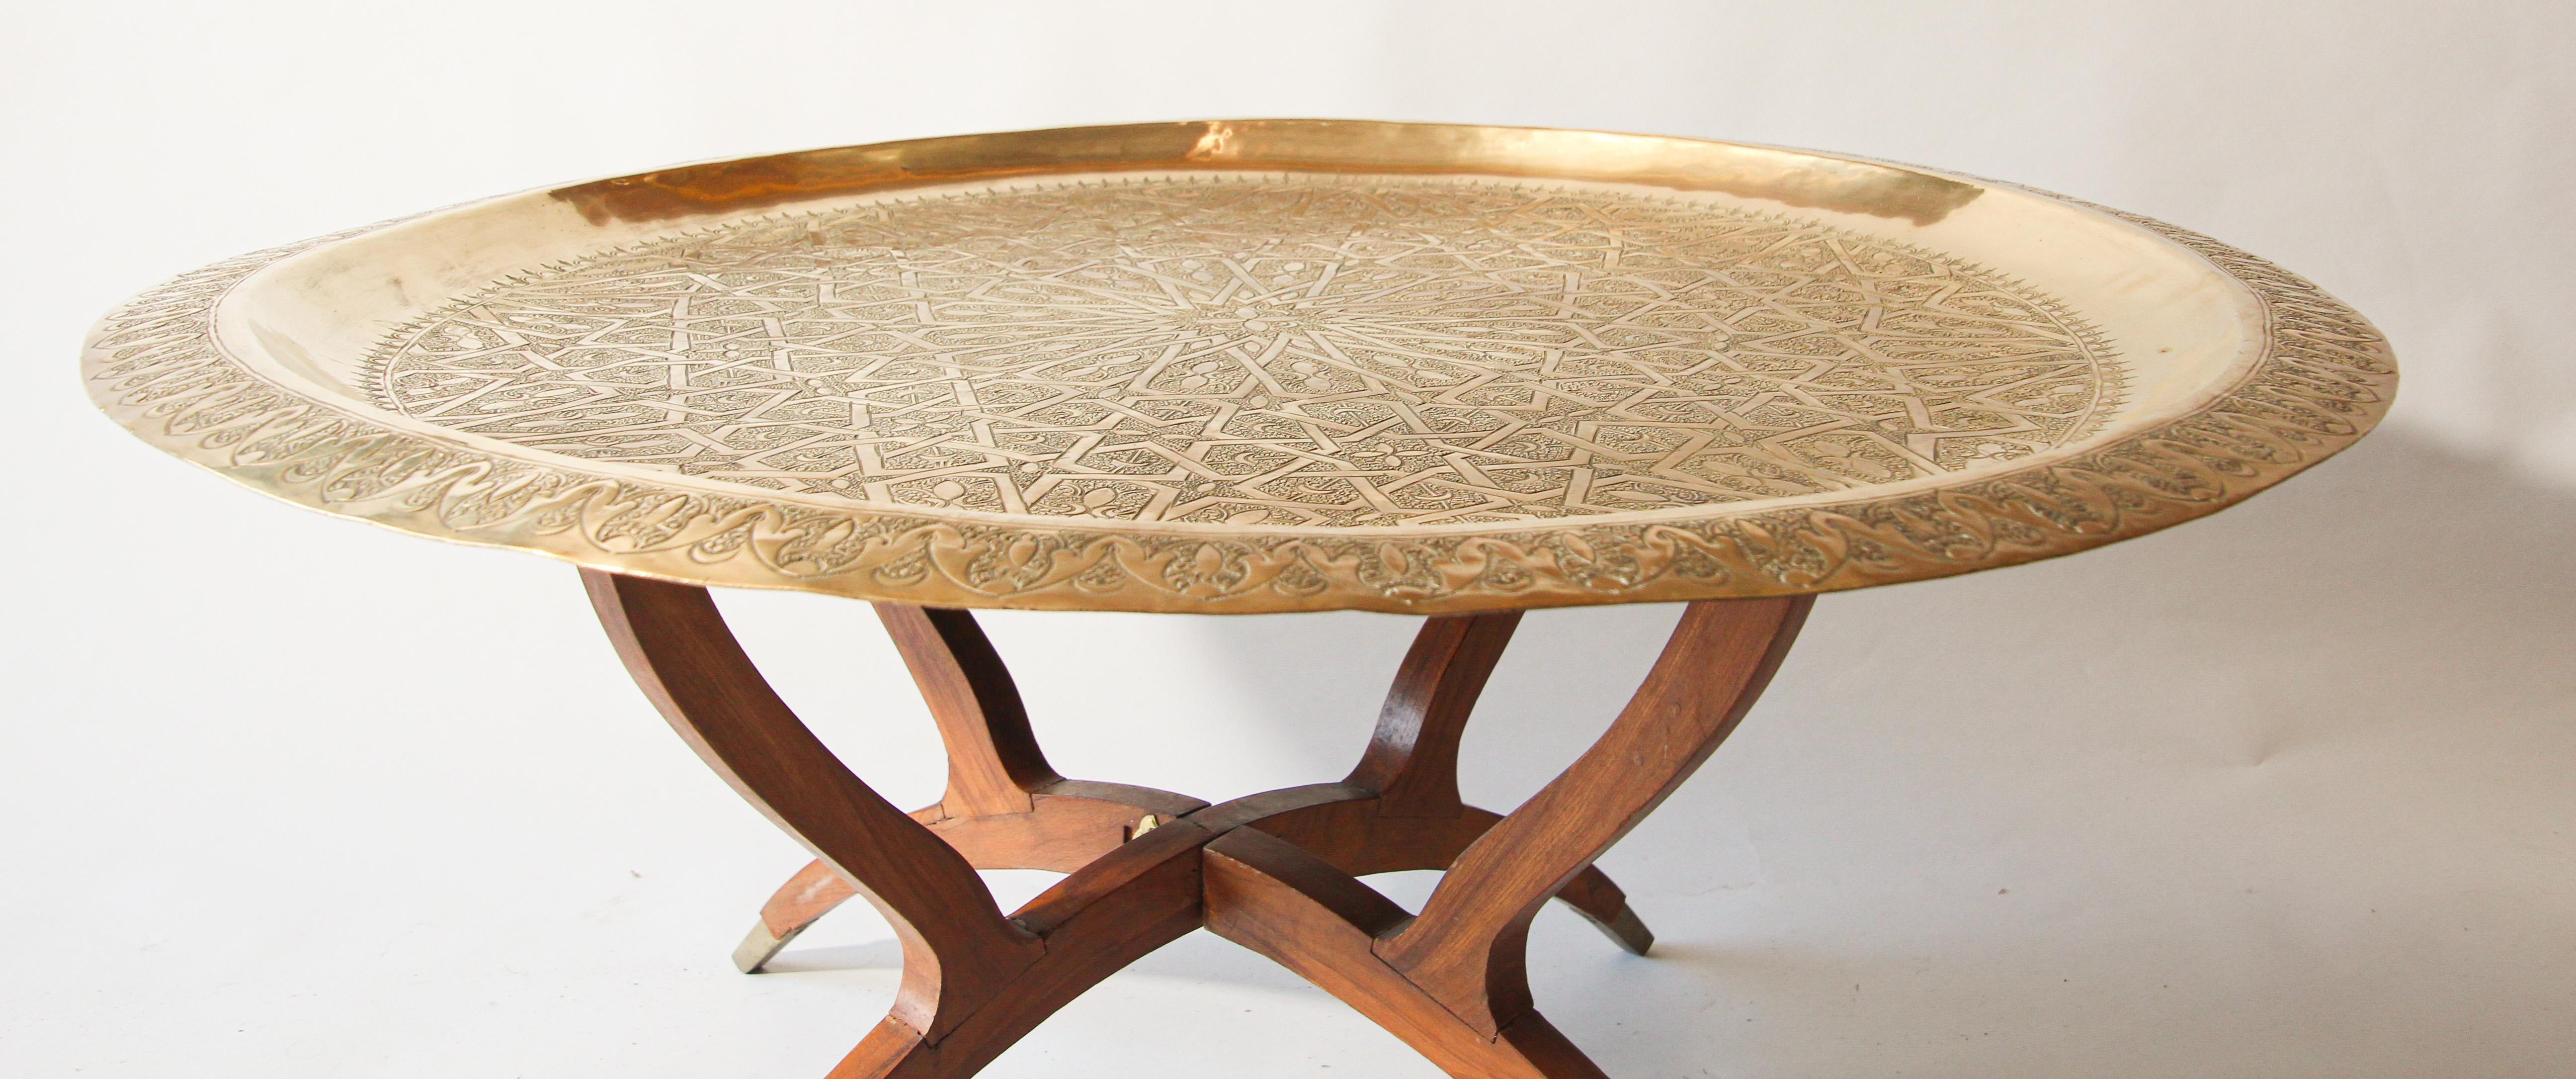 Large Moroccan Round Brass Tray Table on Folding Stand 1